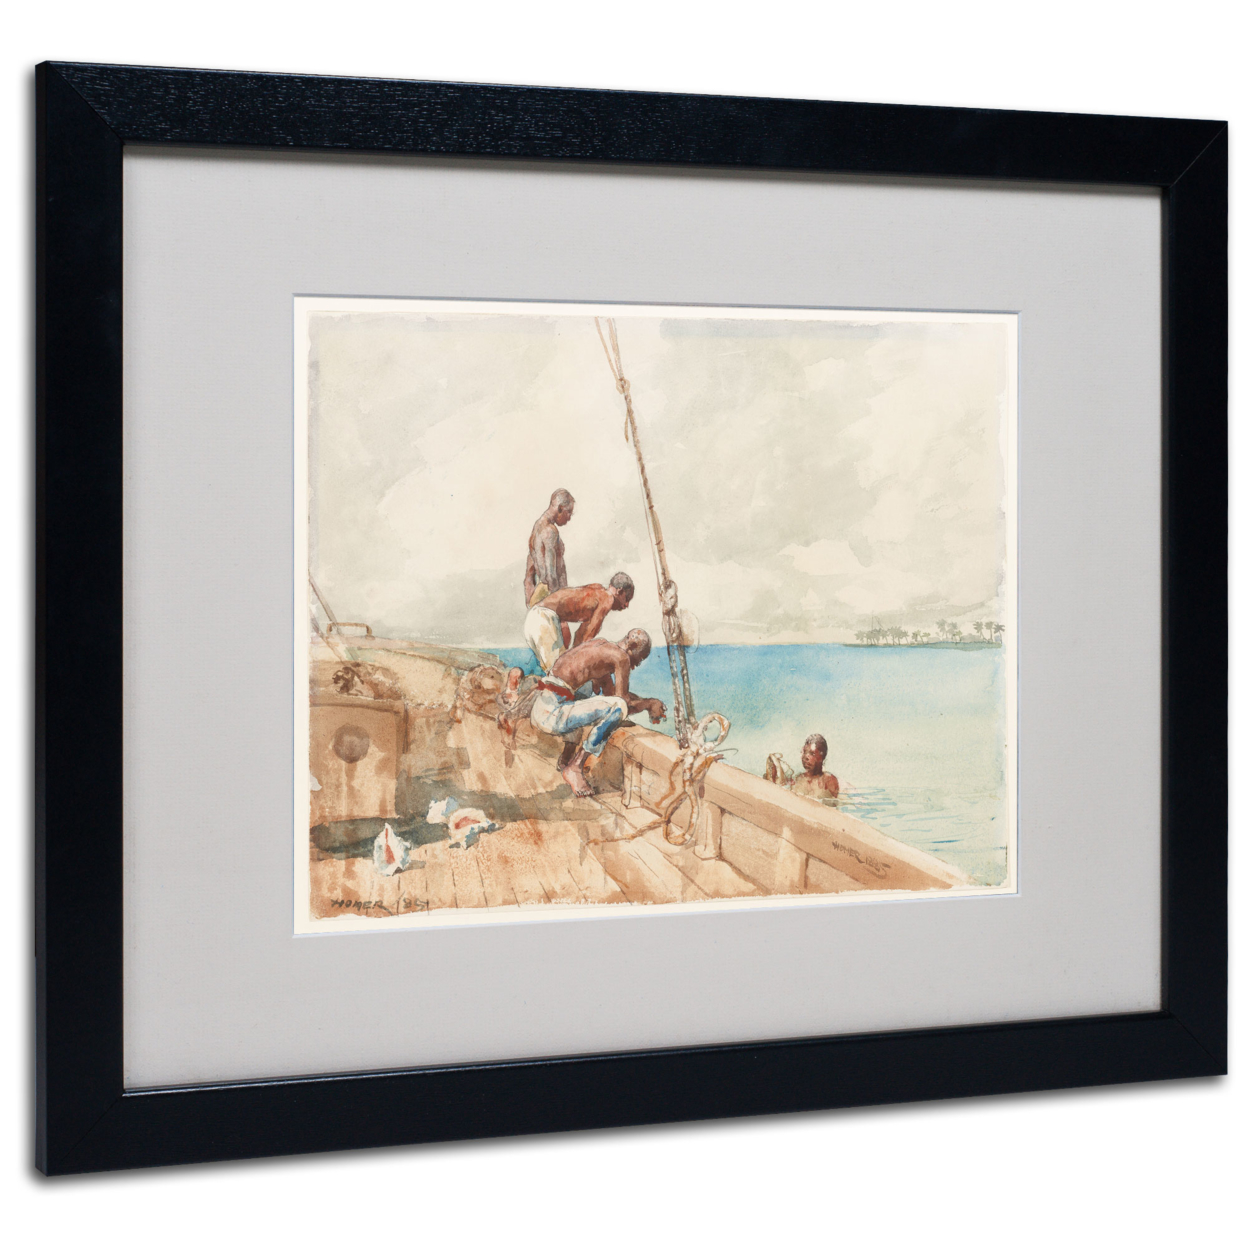 Winslow Homer 'The Conch Divers 1885' Black Wooden Framed Art 18 X 22 Inches